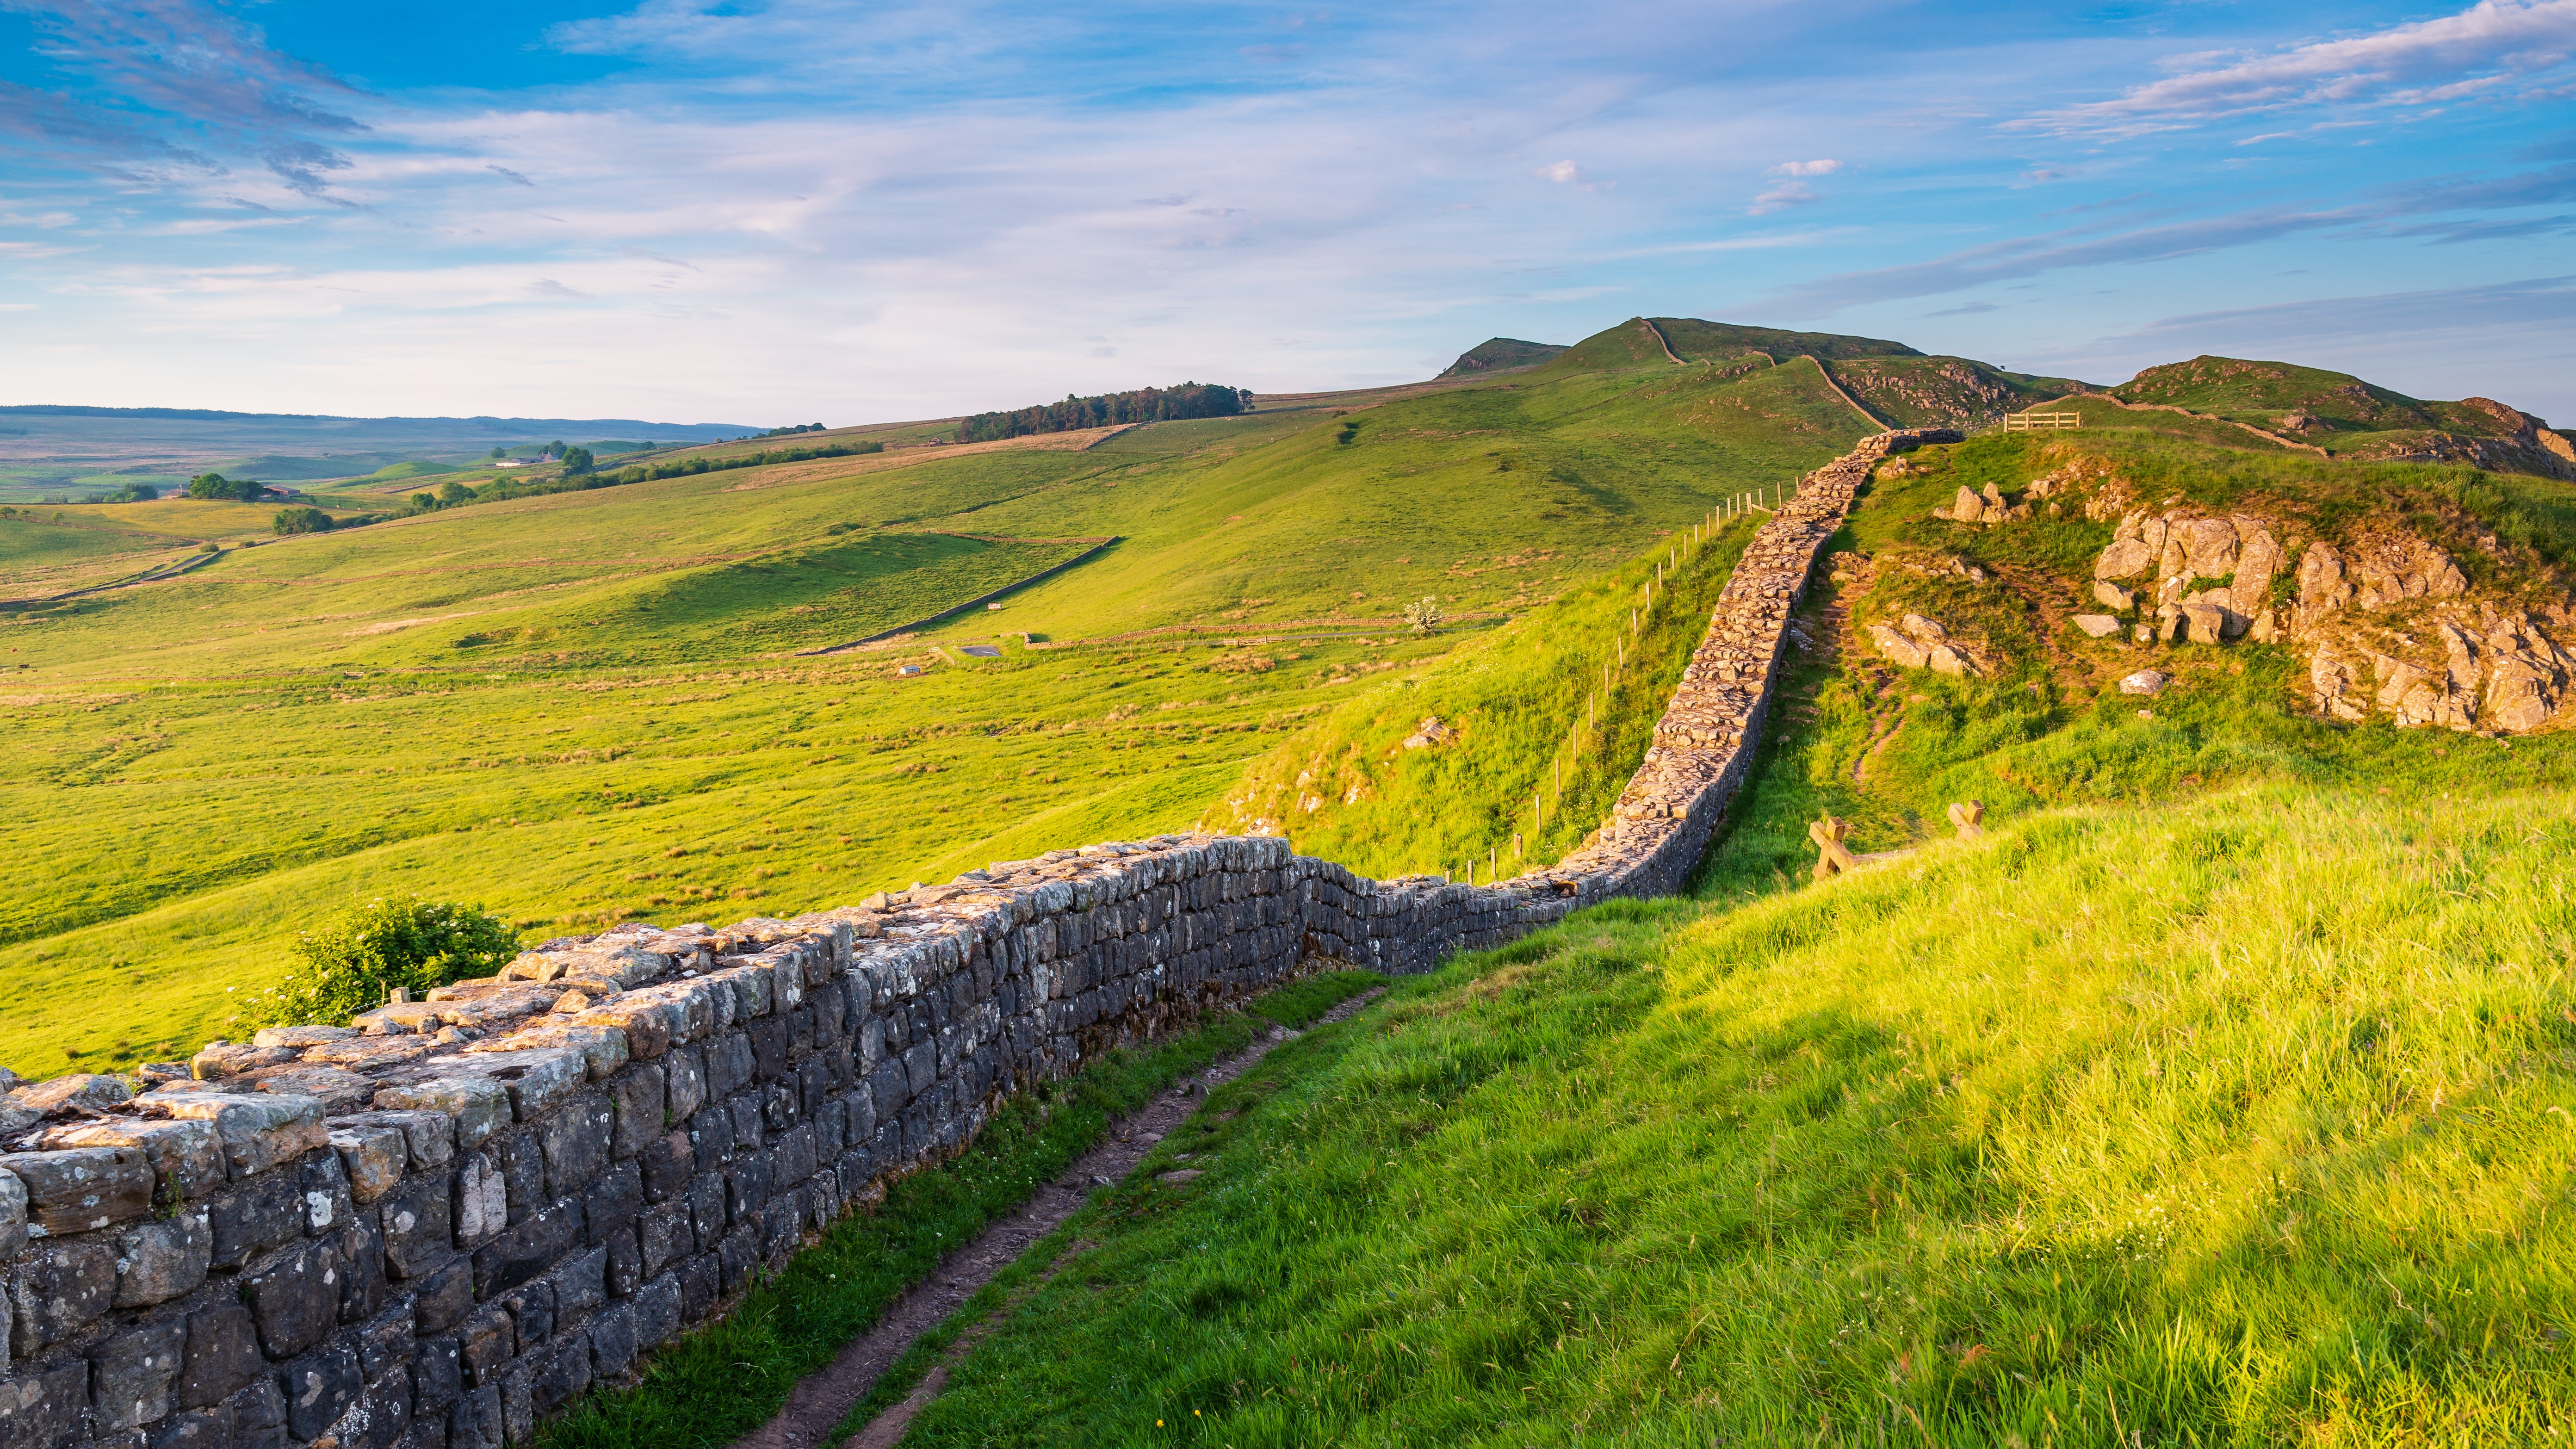 A picture of Hadrian's Wall in the U.K.'s Northumberland National Park.